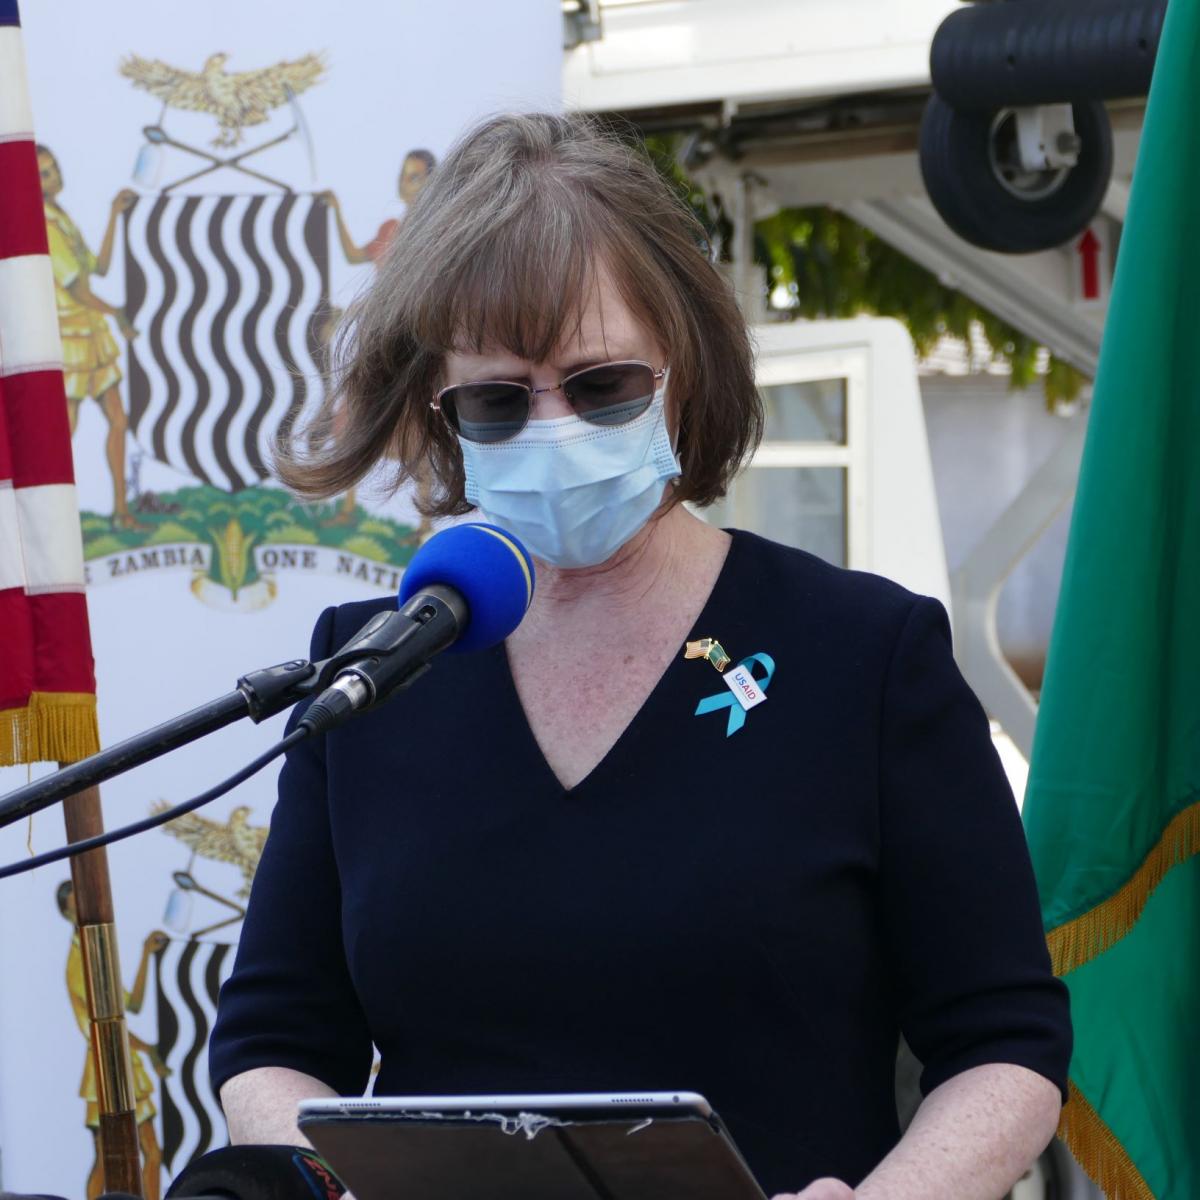 USAID/Zambia Mission Director delivers remarks during the COVAX J&J vaccine arrival event.